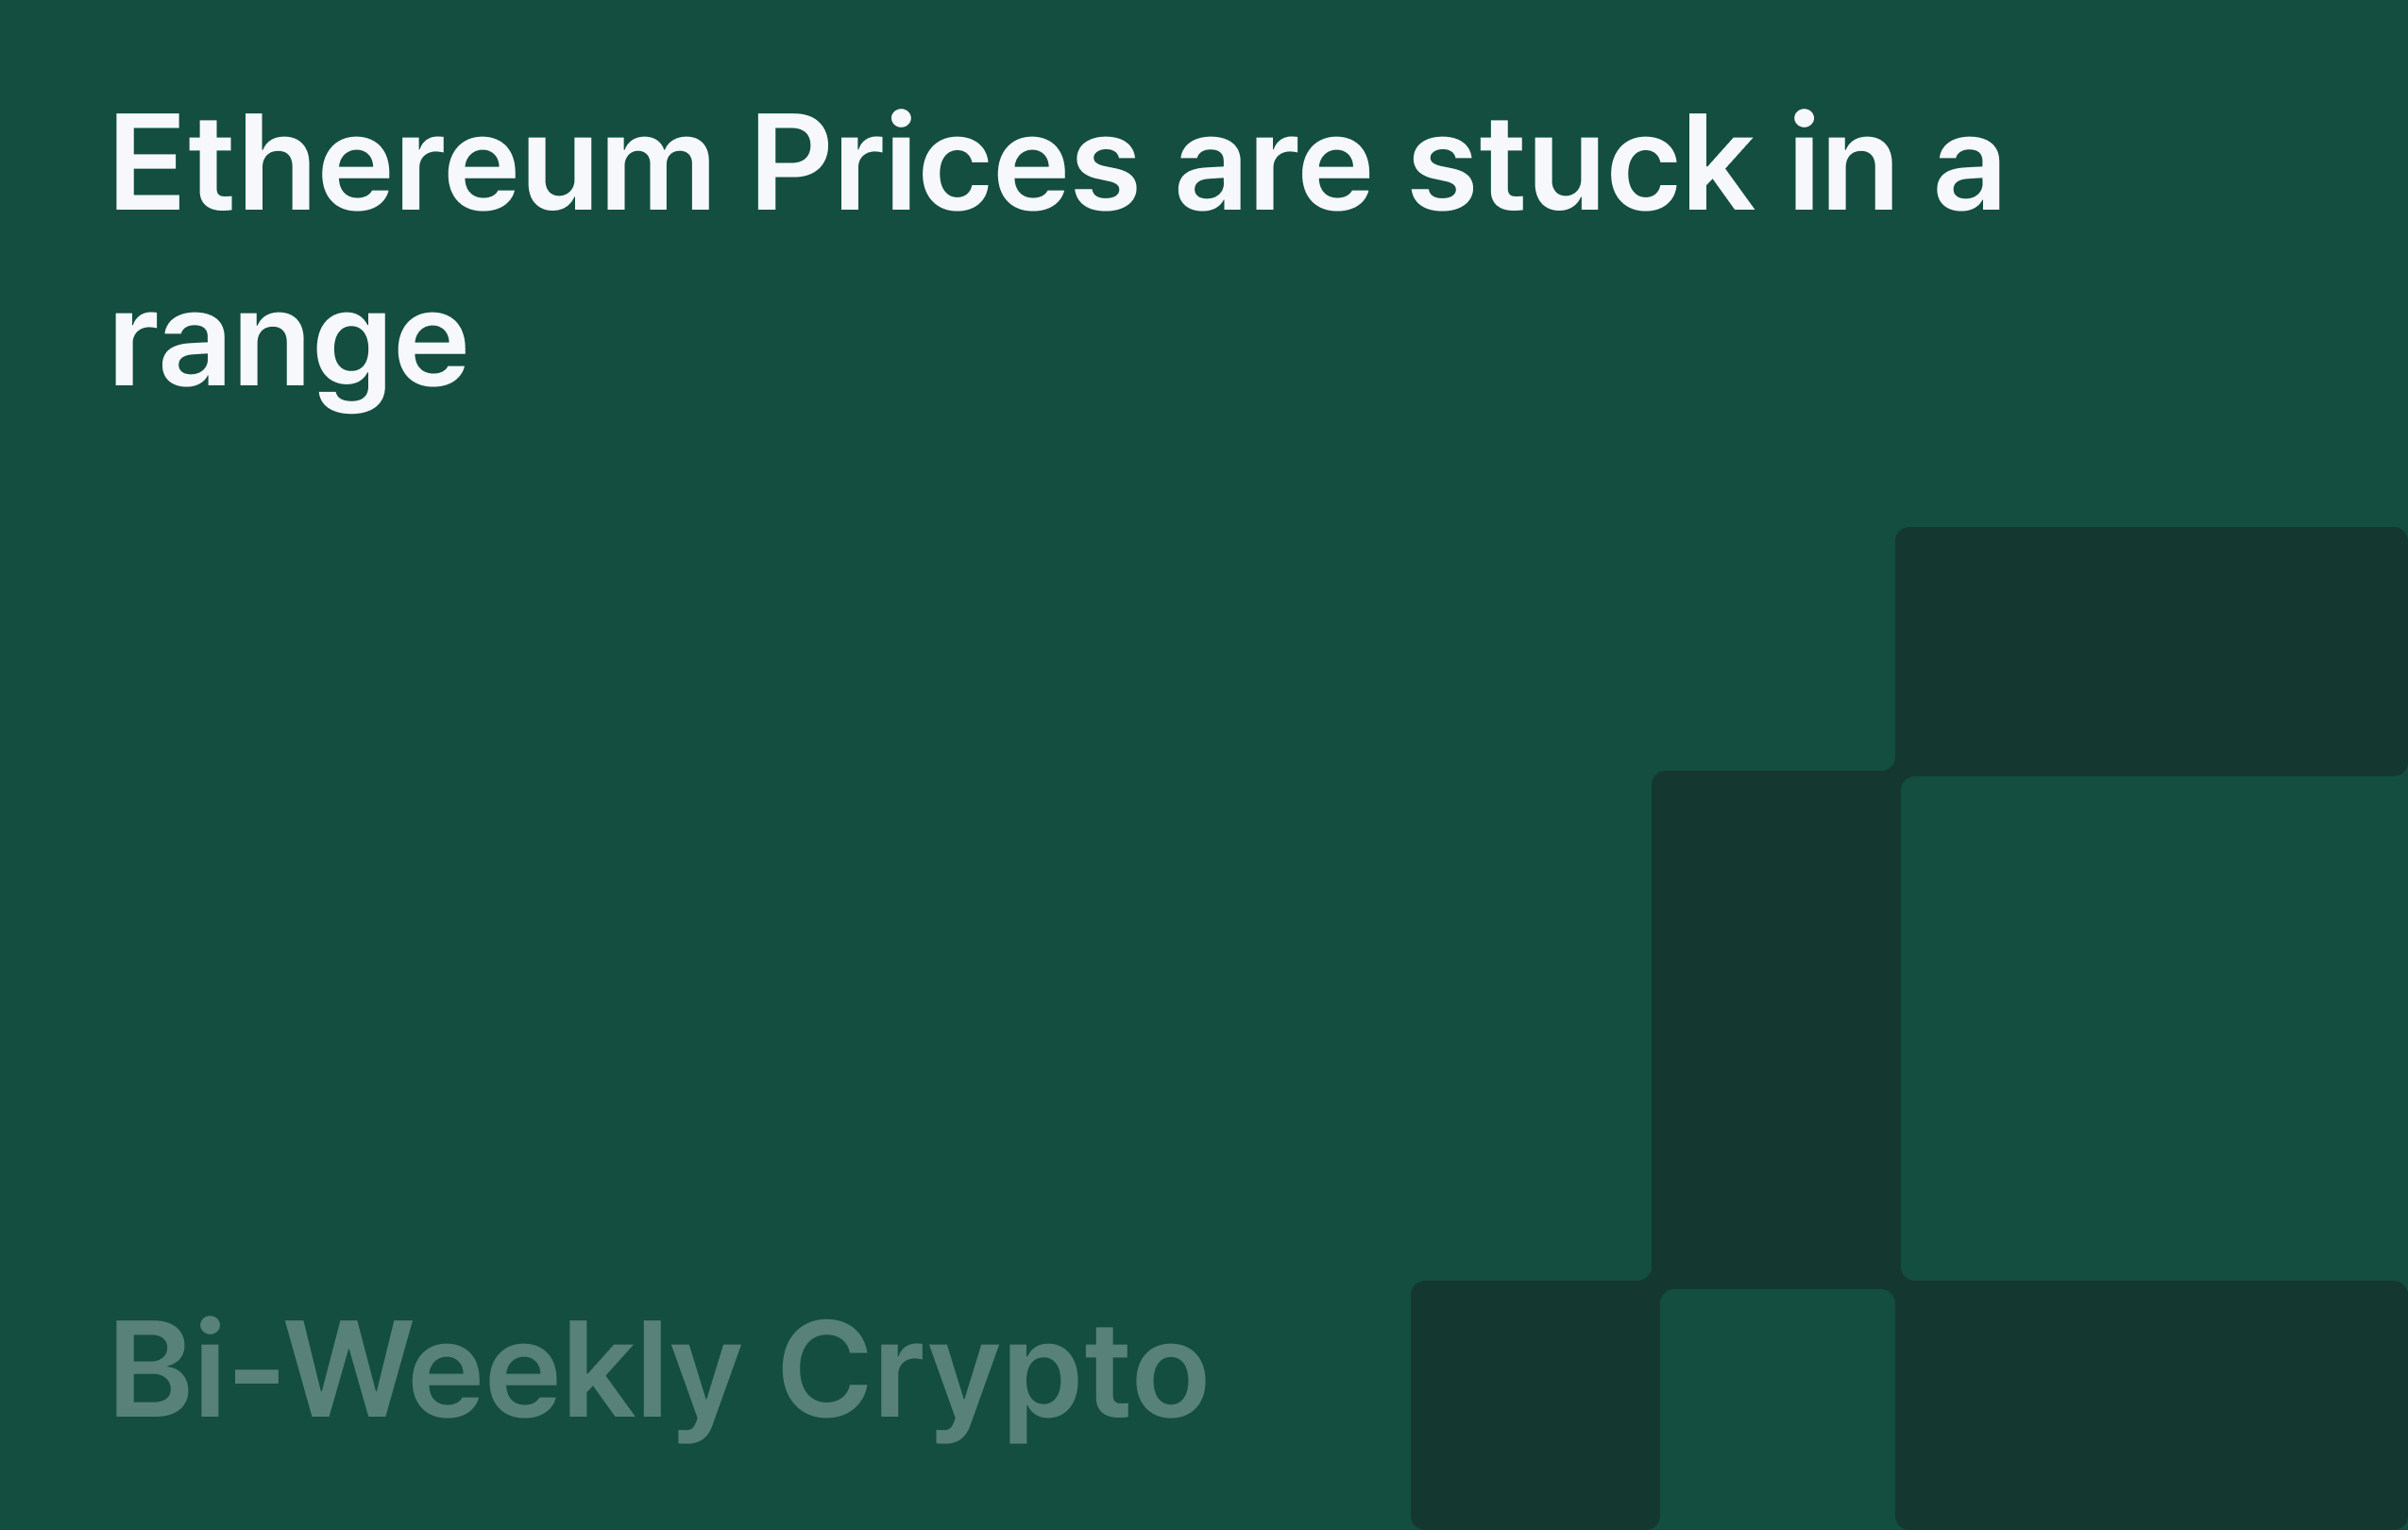 Bi-Weekly Crypto: Prices are stuck in a range 